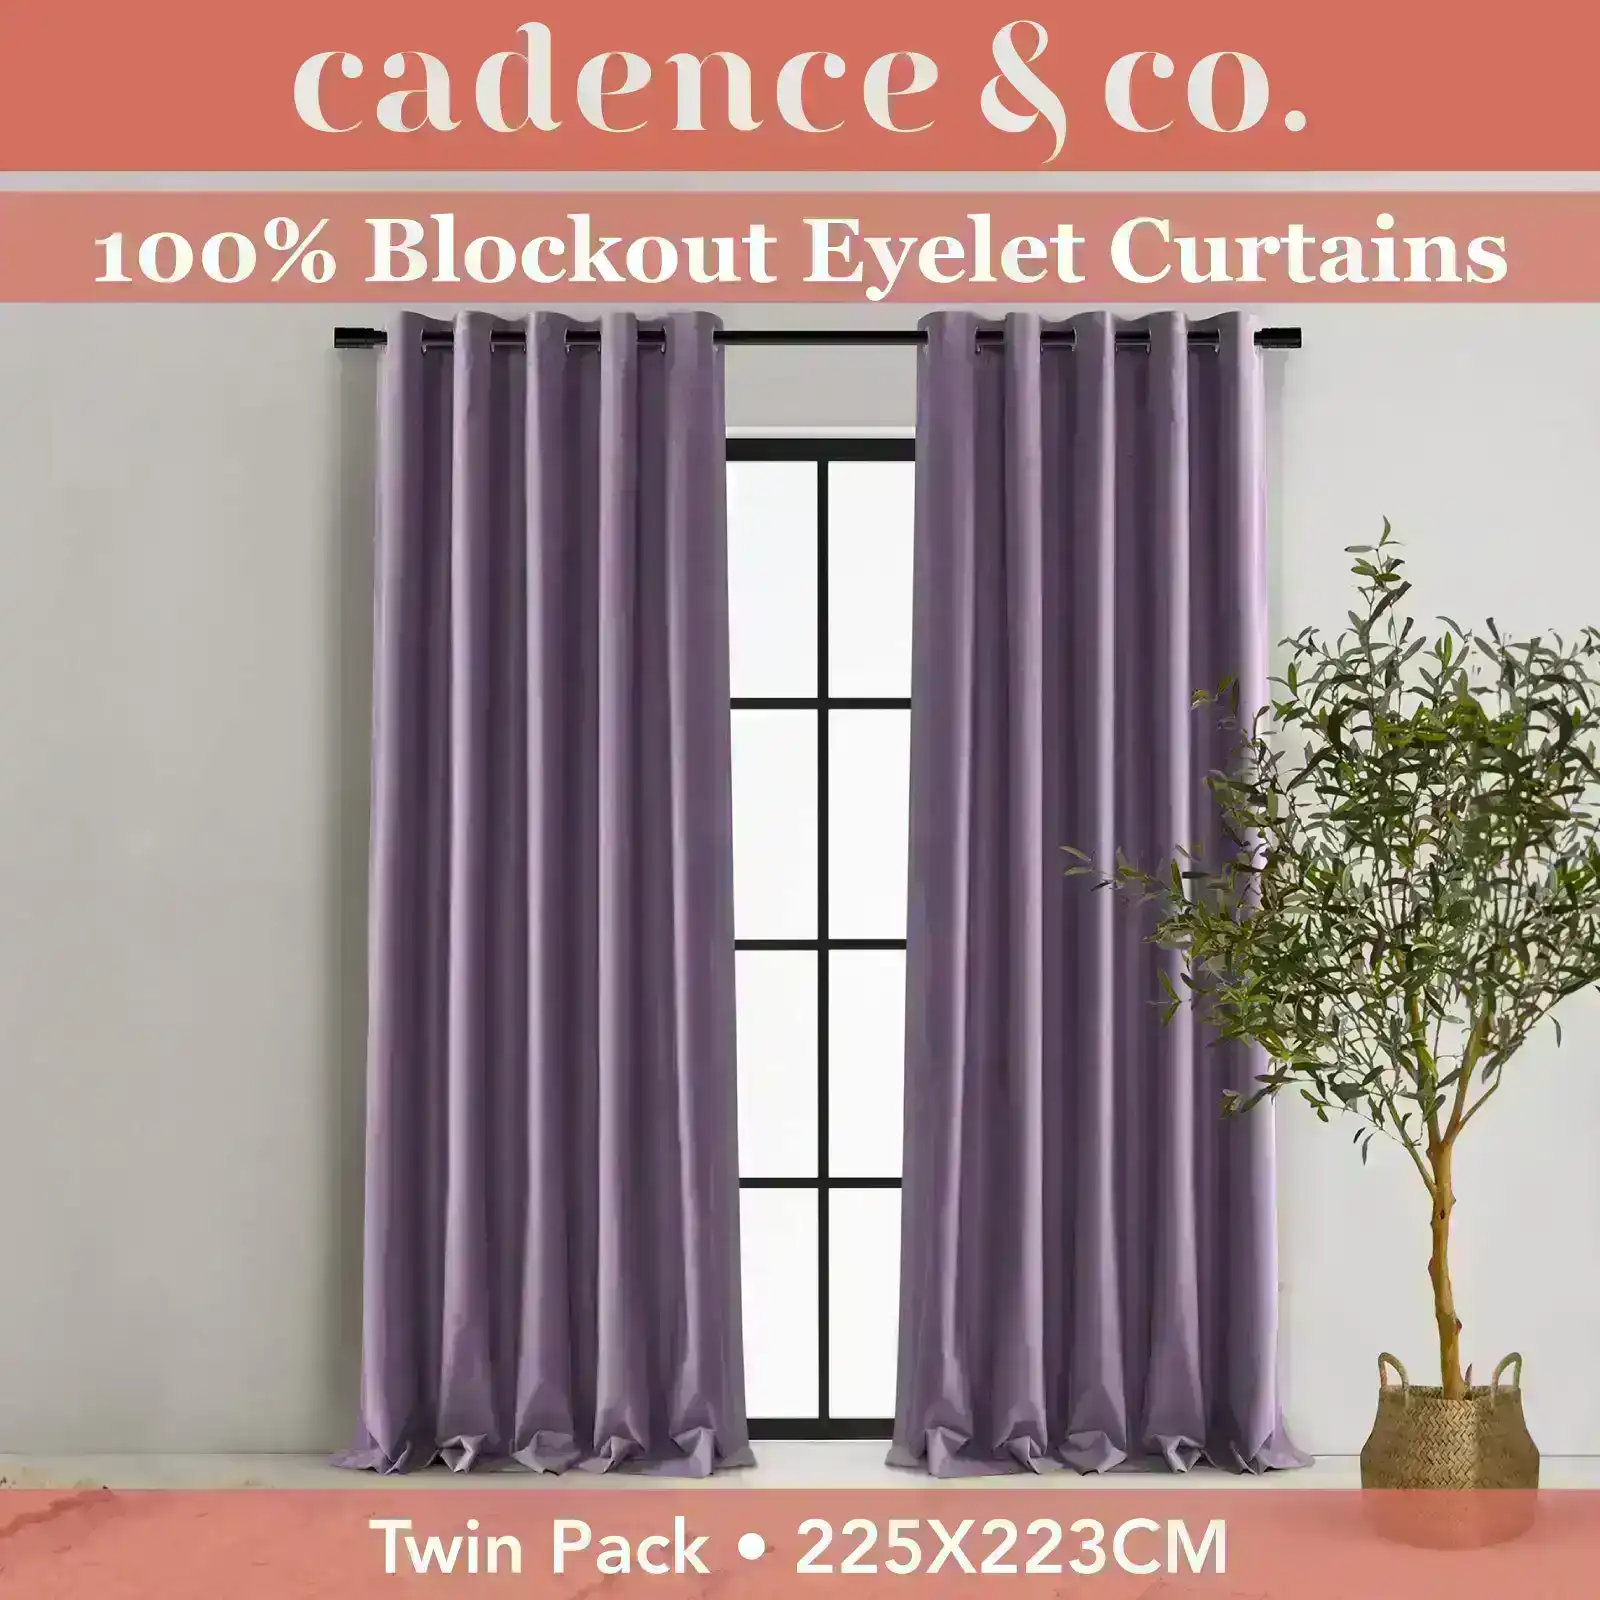 Cadence & Co Byron Matte Velvet 100% Blockout Eyelet Curtains Twin Pack Lilac 225x223cm